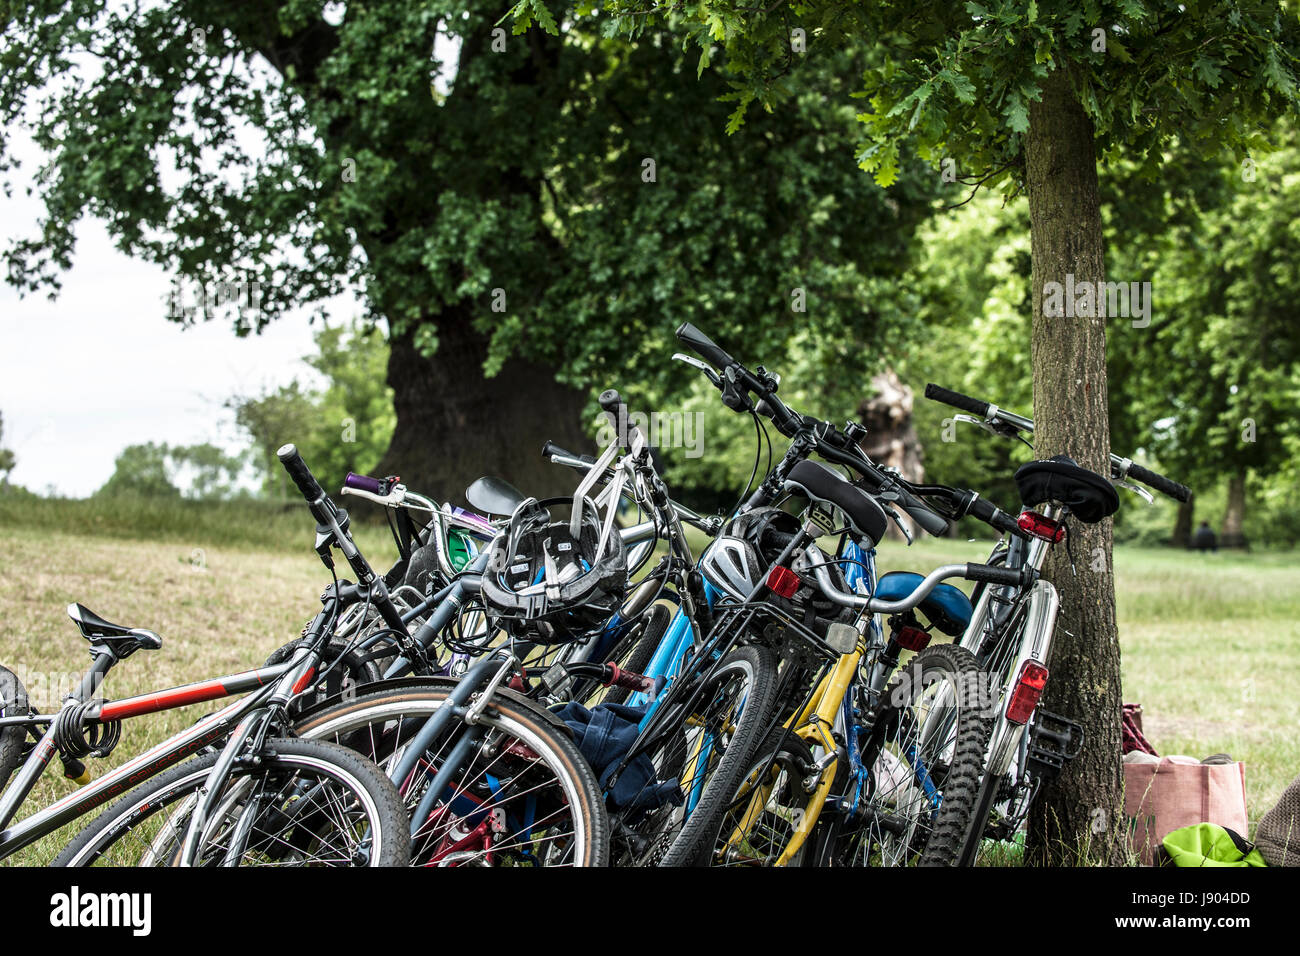 Pile of Bikes leaning against tree Stock Photo